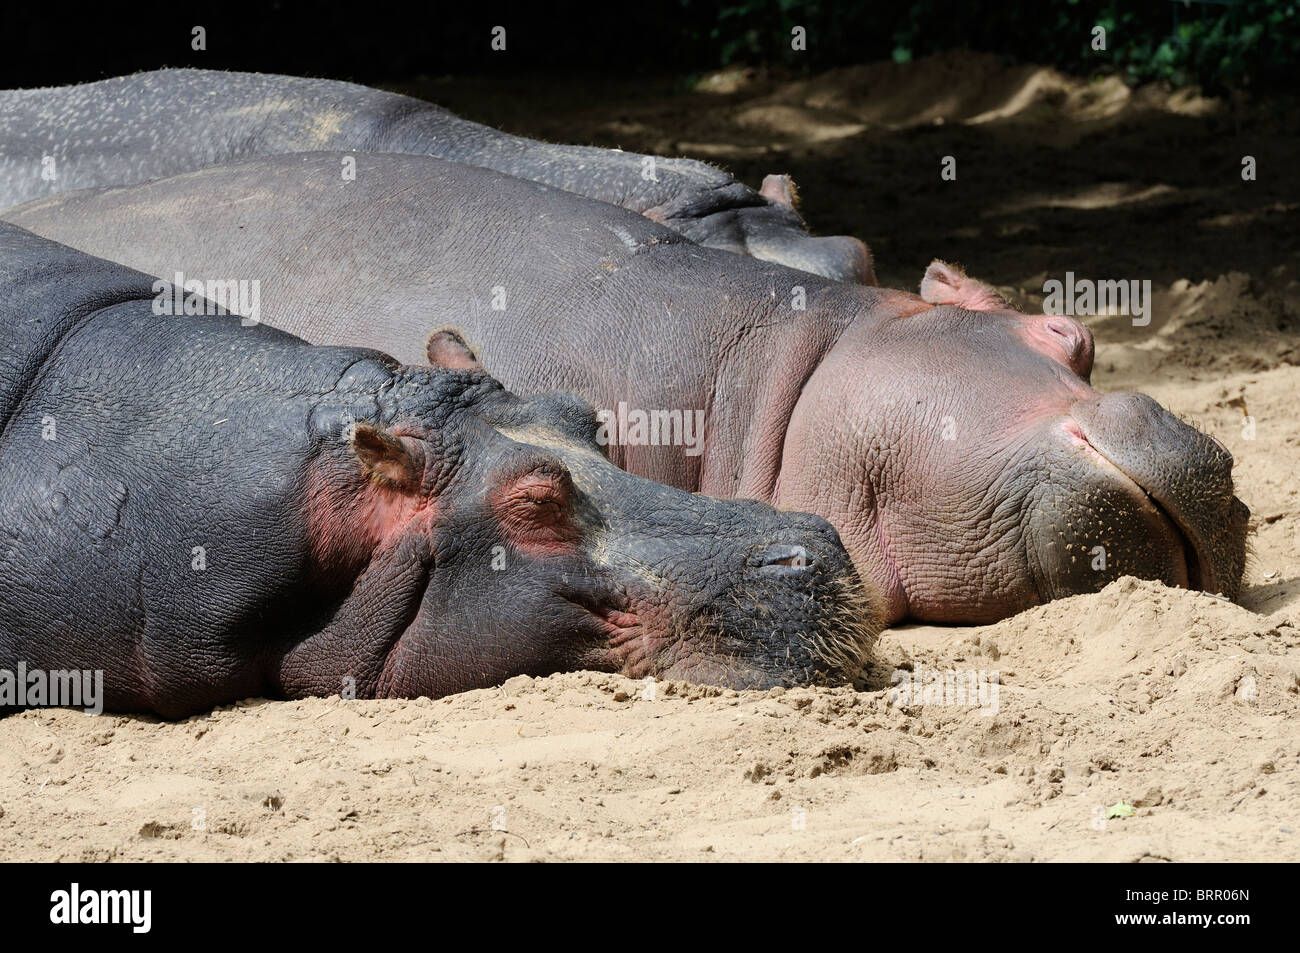 Stock photo of two Hippopotami lying next to each other at La Palmyre zoo in France. Stock Photo